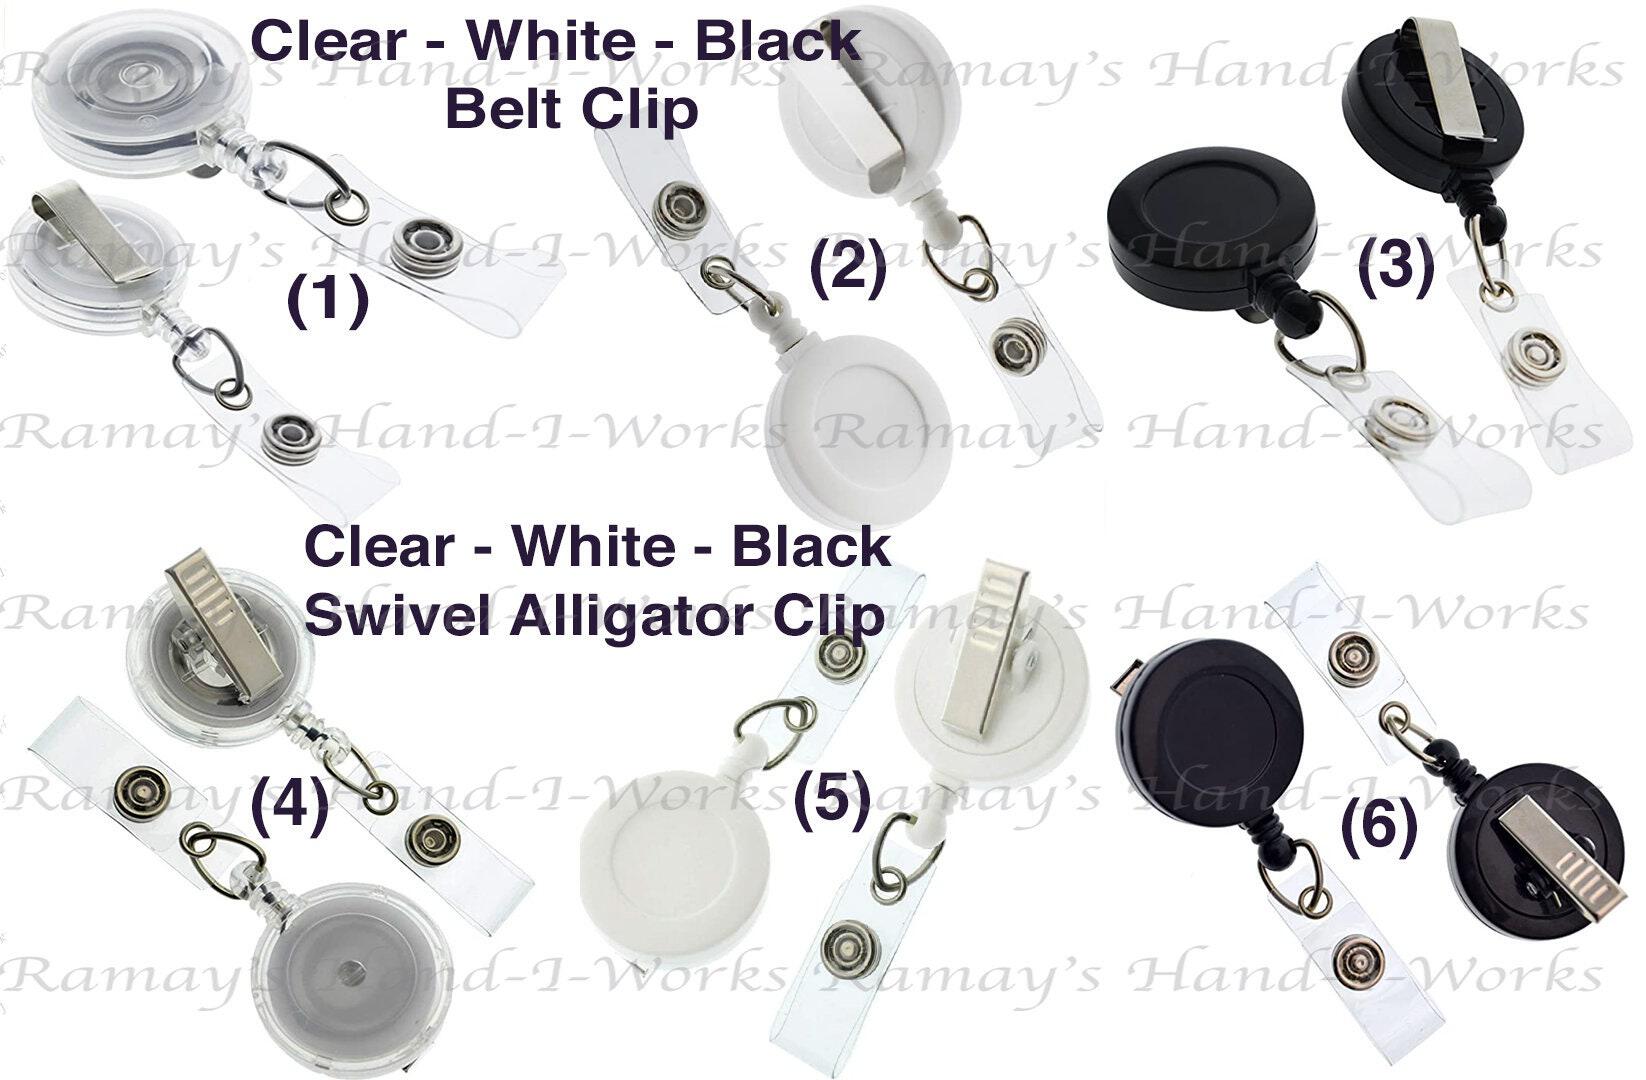 Retractable ID Badge Holder/Clip - Kentucky State Police